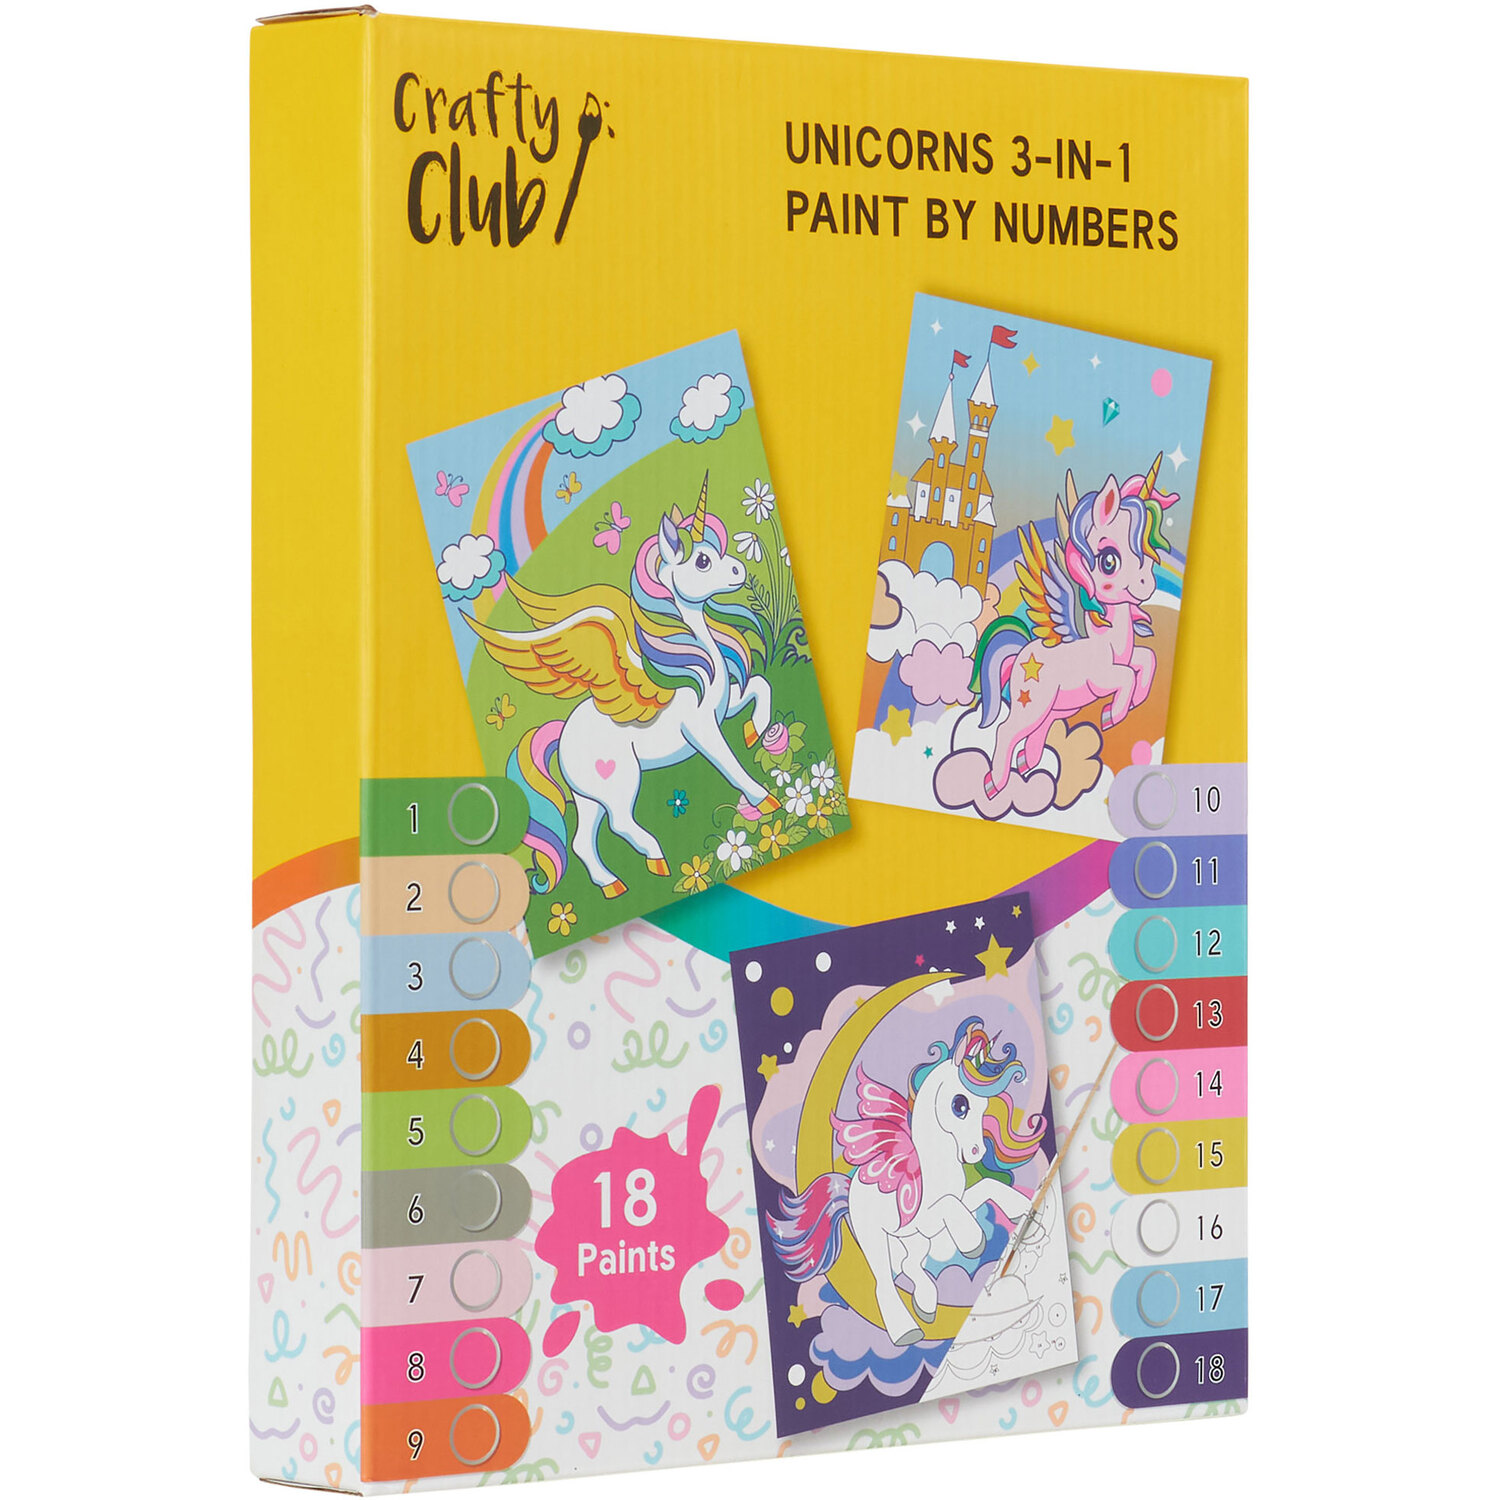 Crafty Club Unicorns 3 in 1 Paint by Numbers Kit Image 3